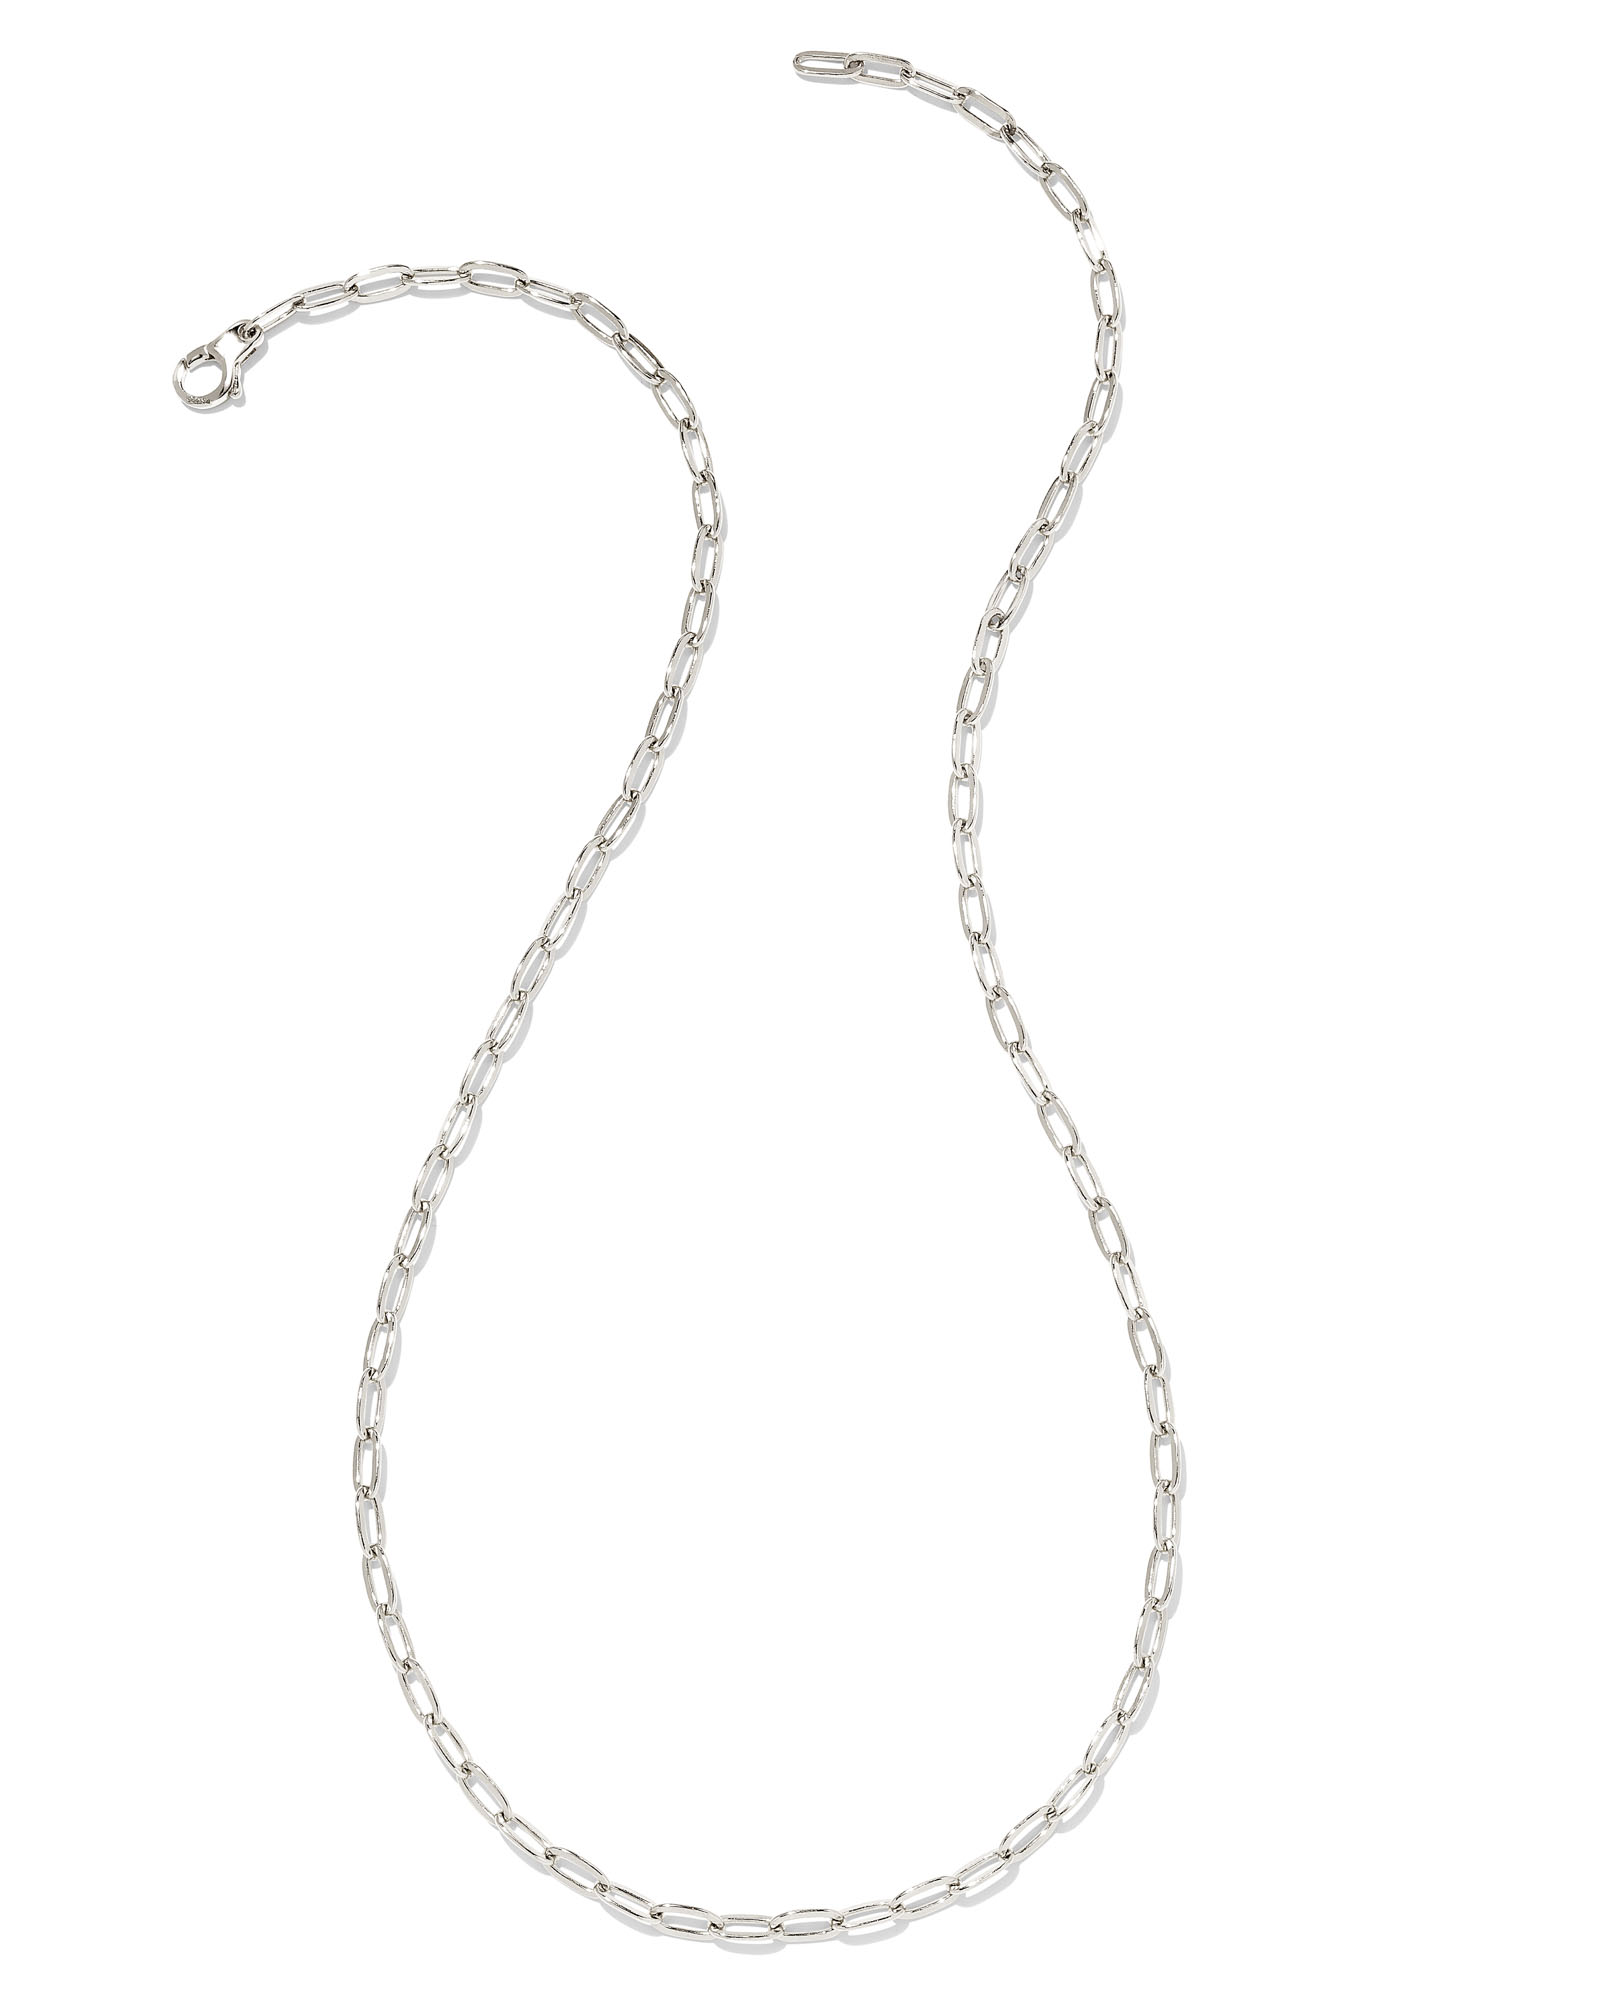 Small Paperclip Chain Necklace-Long Drawn Cable Chain-  Layering-Minimalist-Basic-Holiday (15, Bright Sterling Silver)